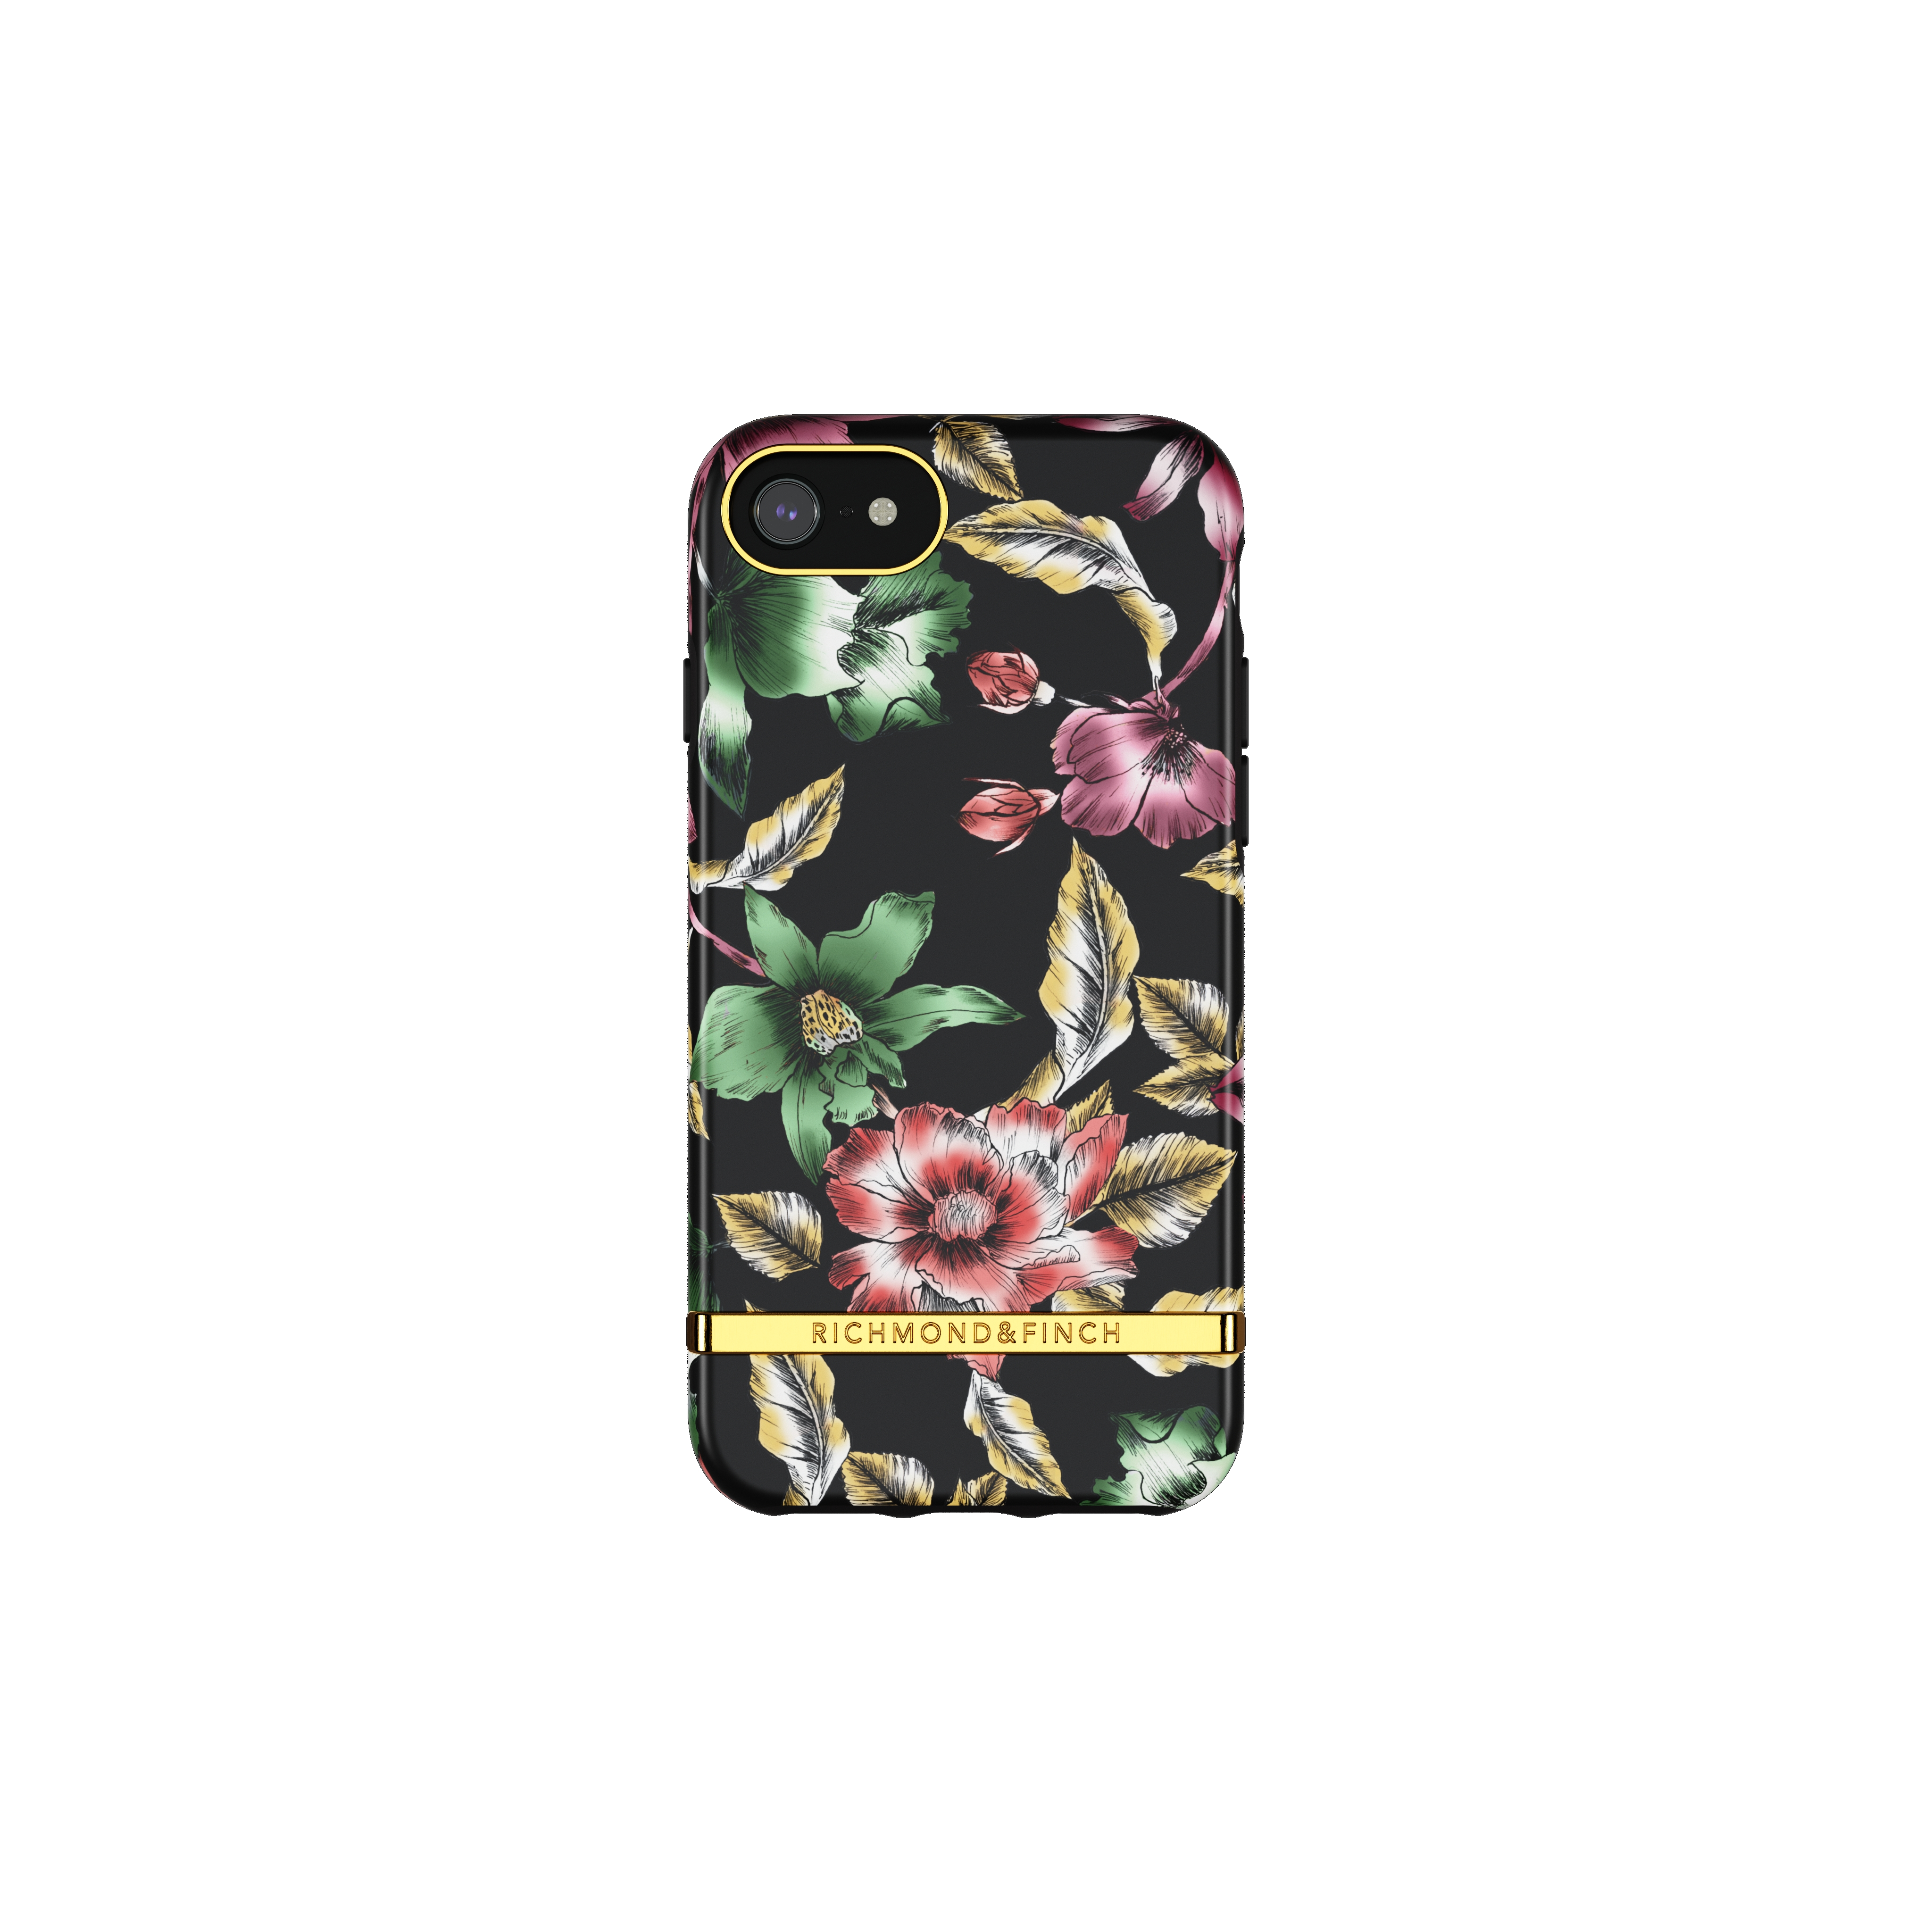 RICHMOND iPhone & IPHONE 6/6S/7/8/SE20/SE22, APPLE, 6/7/8/SE, Show COLOURFUL Flower Backcover, FINCH